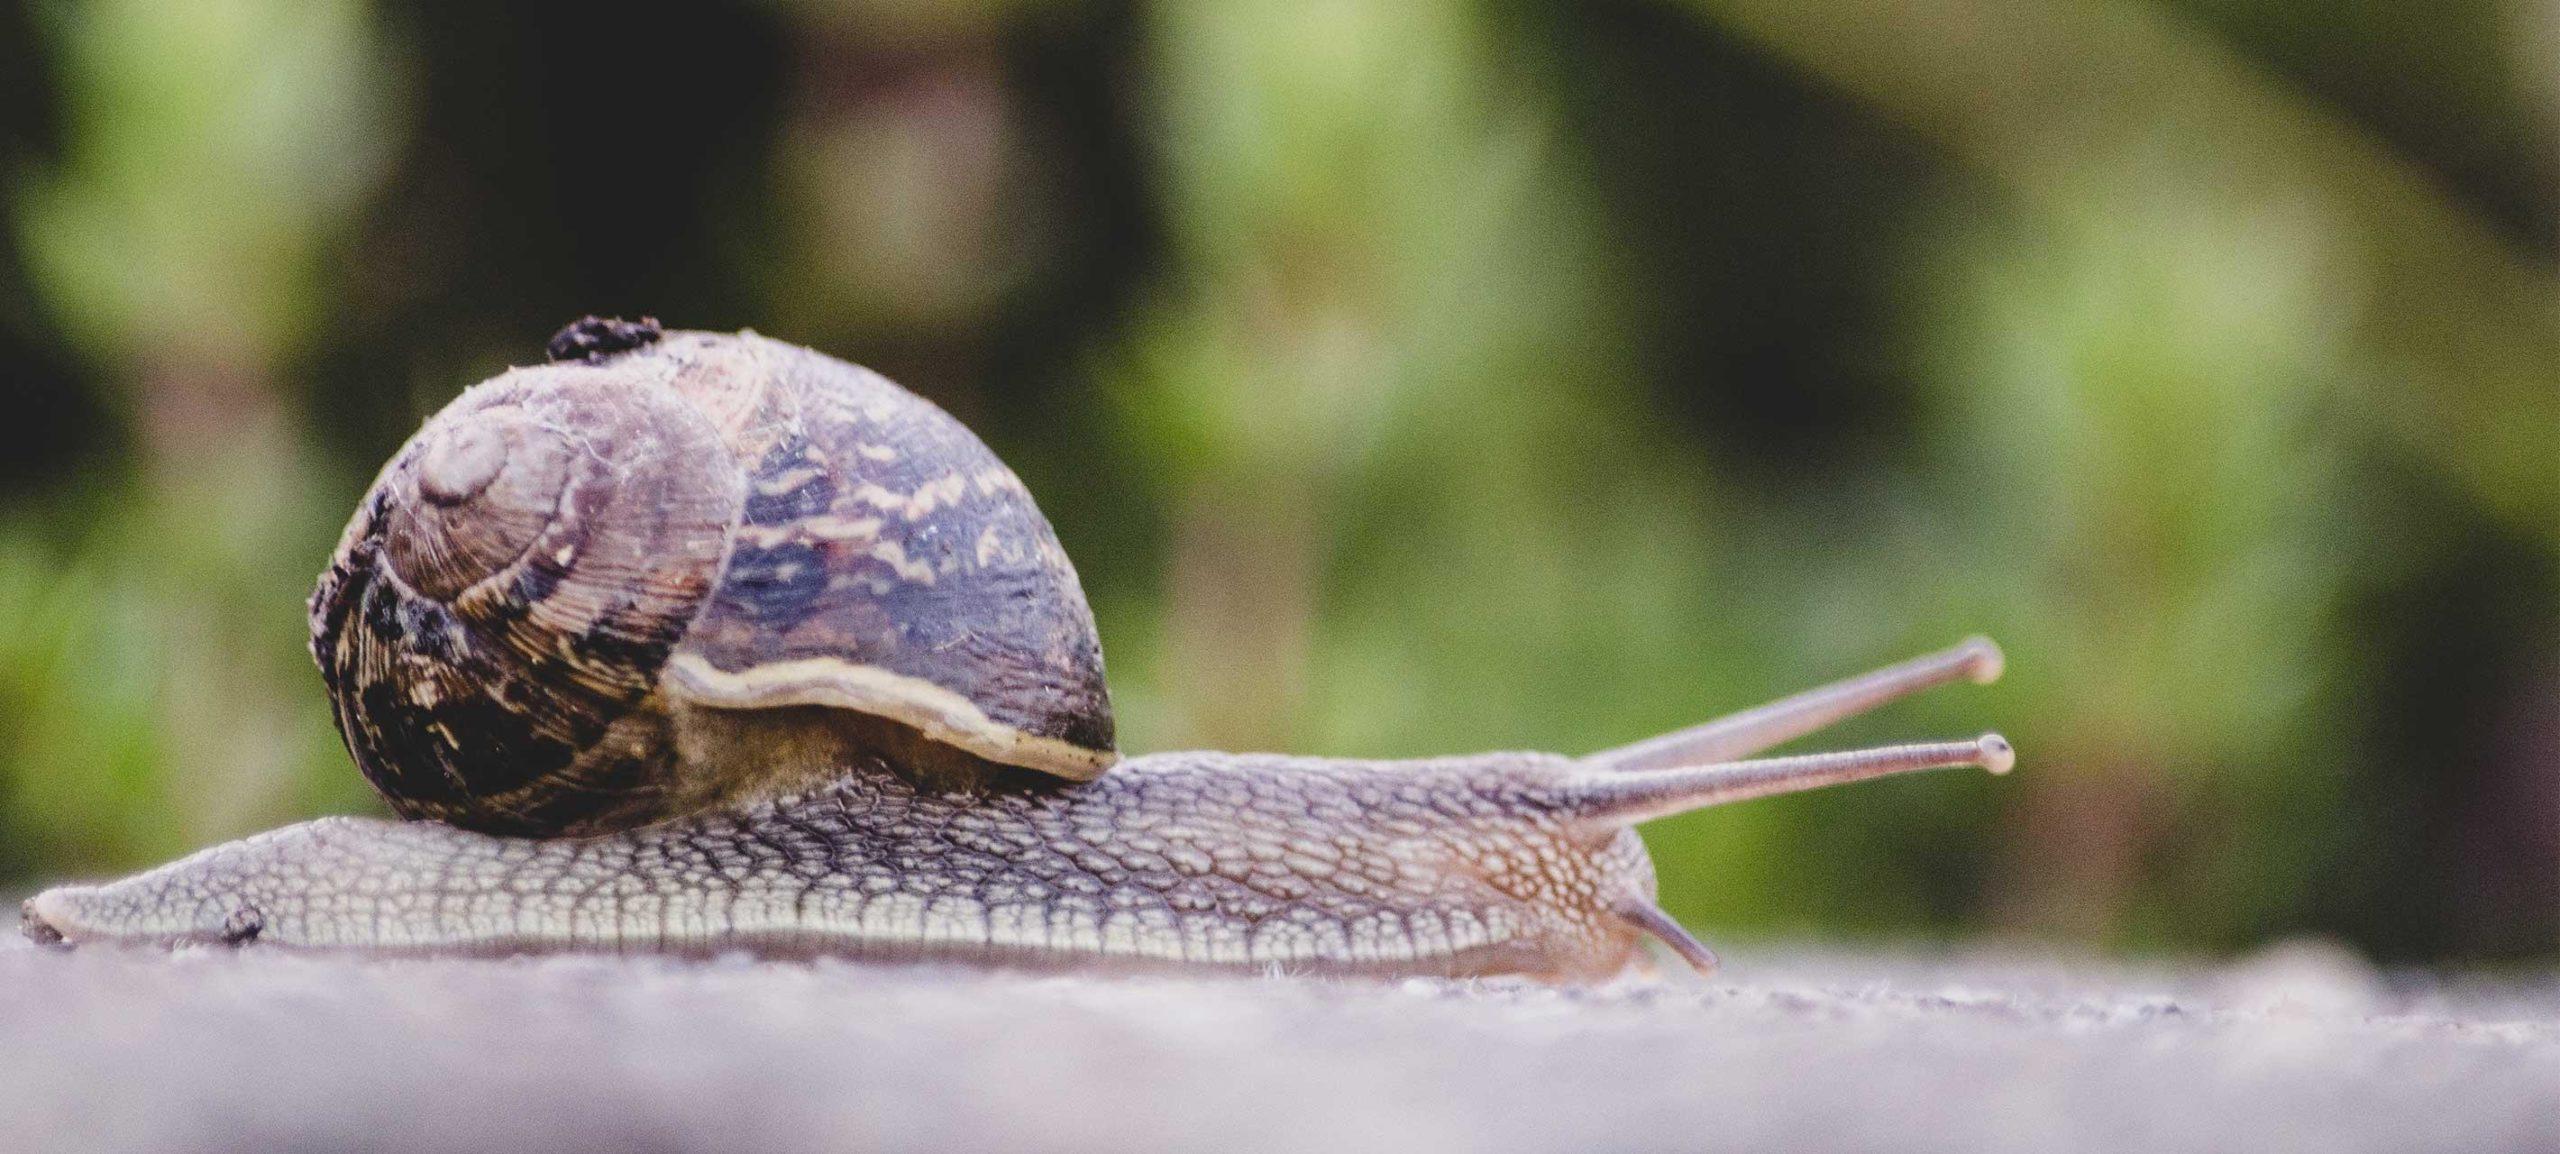 5 Key Reasons Why Your WordPress Site is Slow